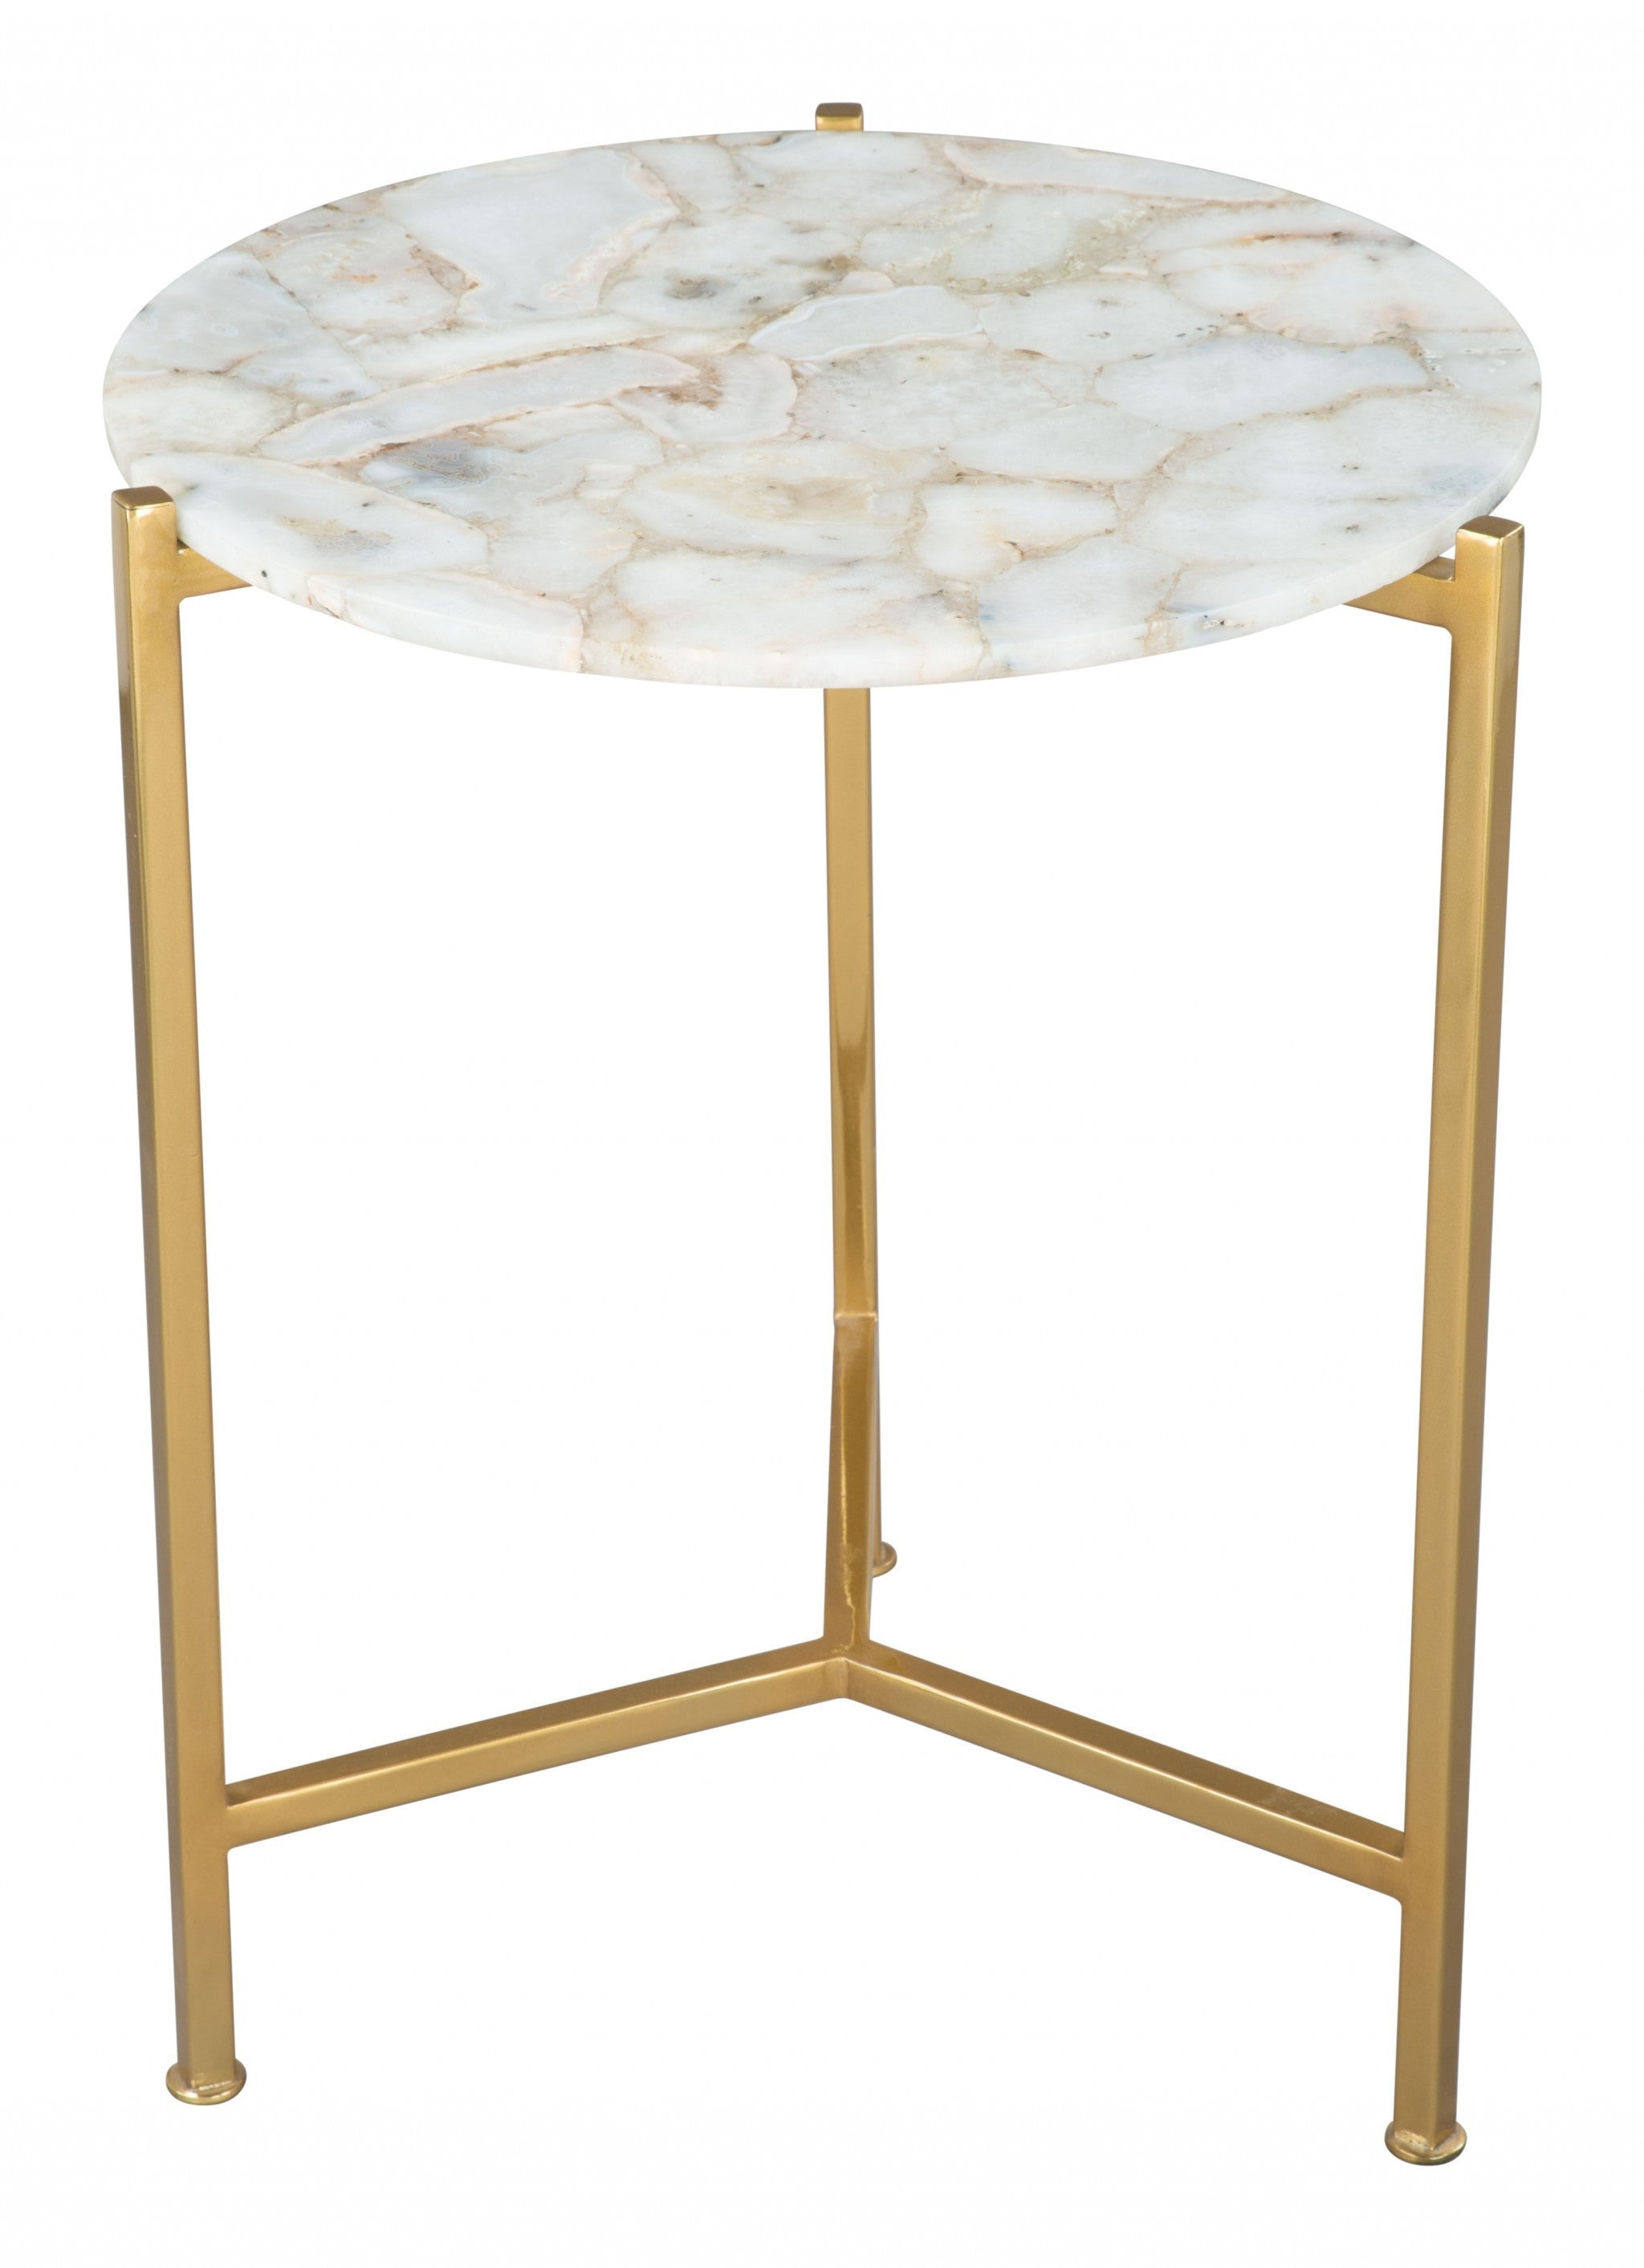 20" Gold And White Genuine Marble Look Round End Table